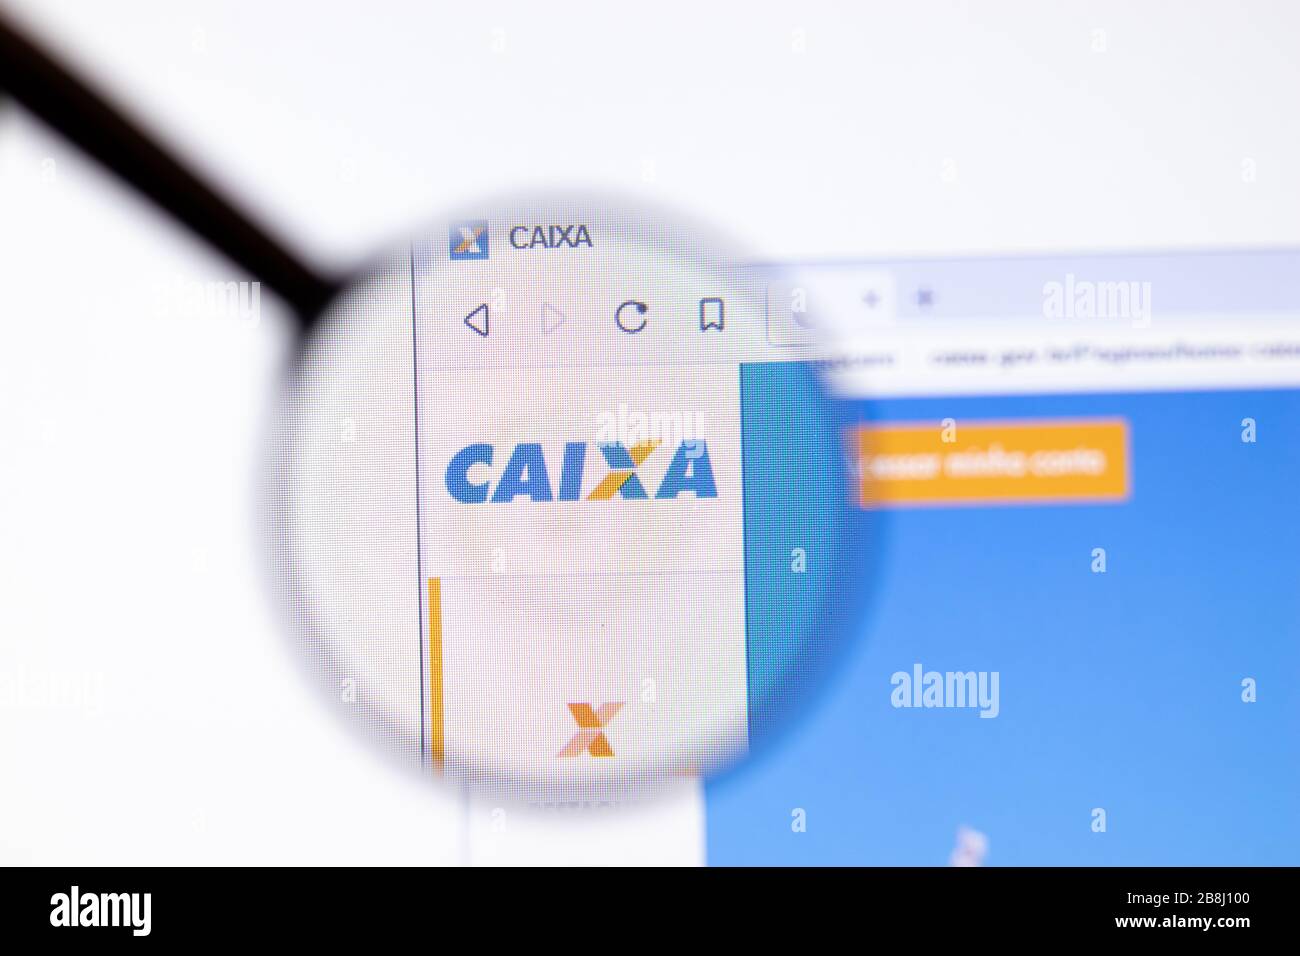 Los Angeles, California, USA - 20 March 2020: Caixa Economica Federal company logo on website page close-up on screen, Illustrative Editorial Stock Photo